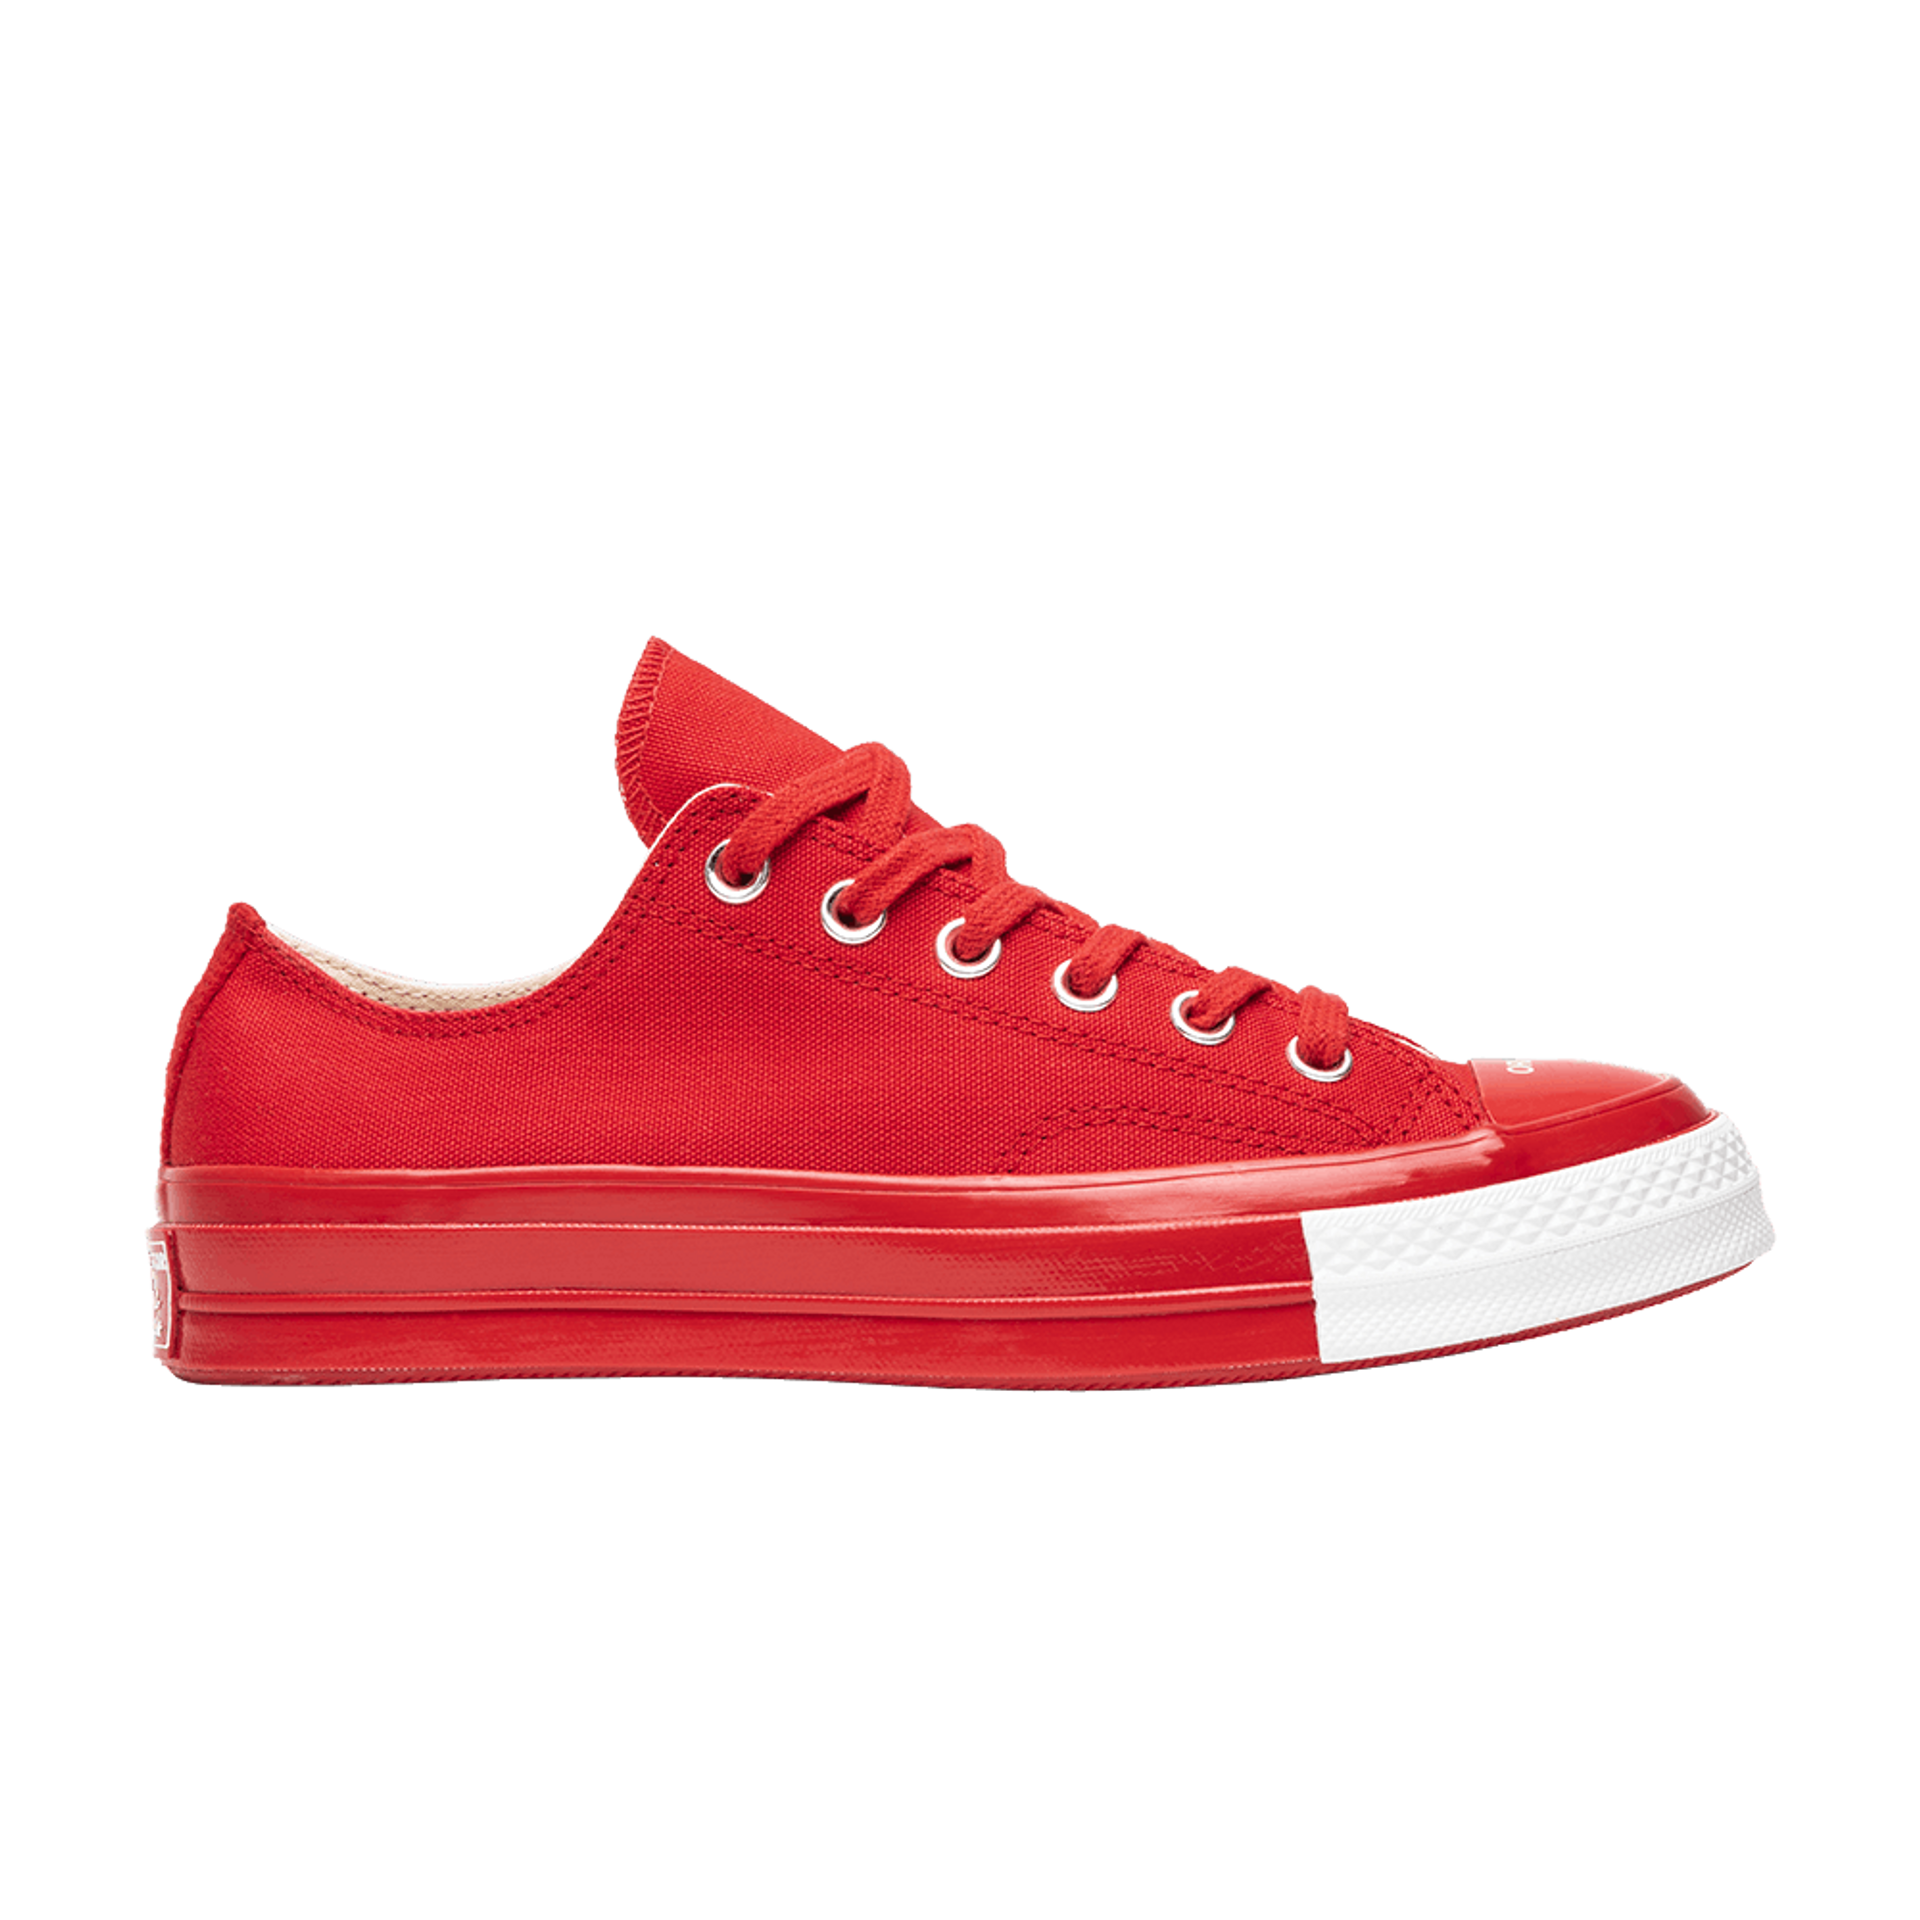 Converse Undercover x Chuck 70 Low 'Order and Disorder' - Red